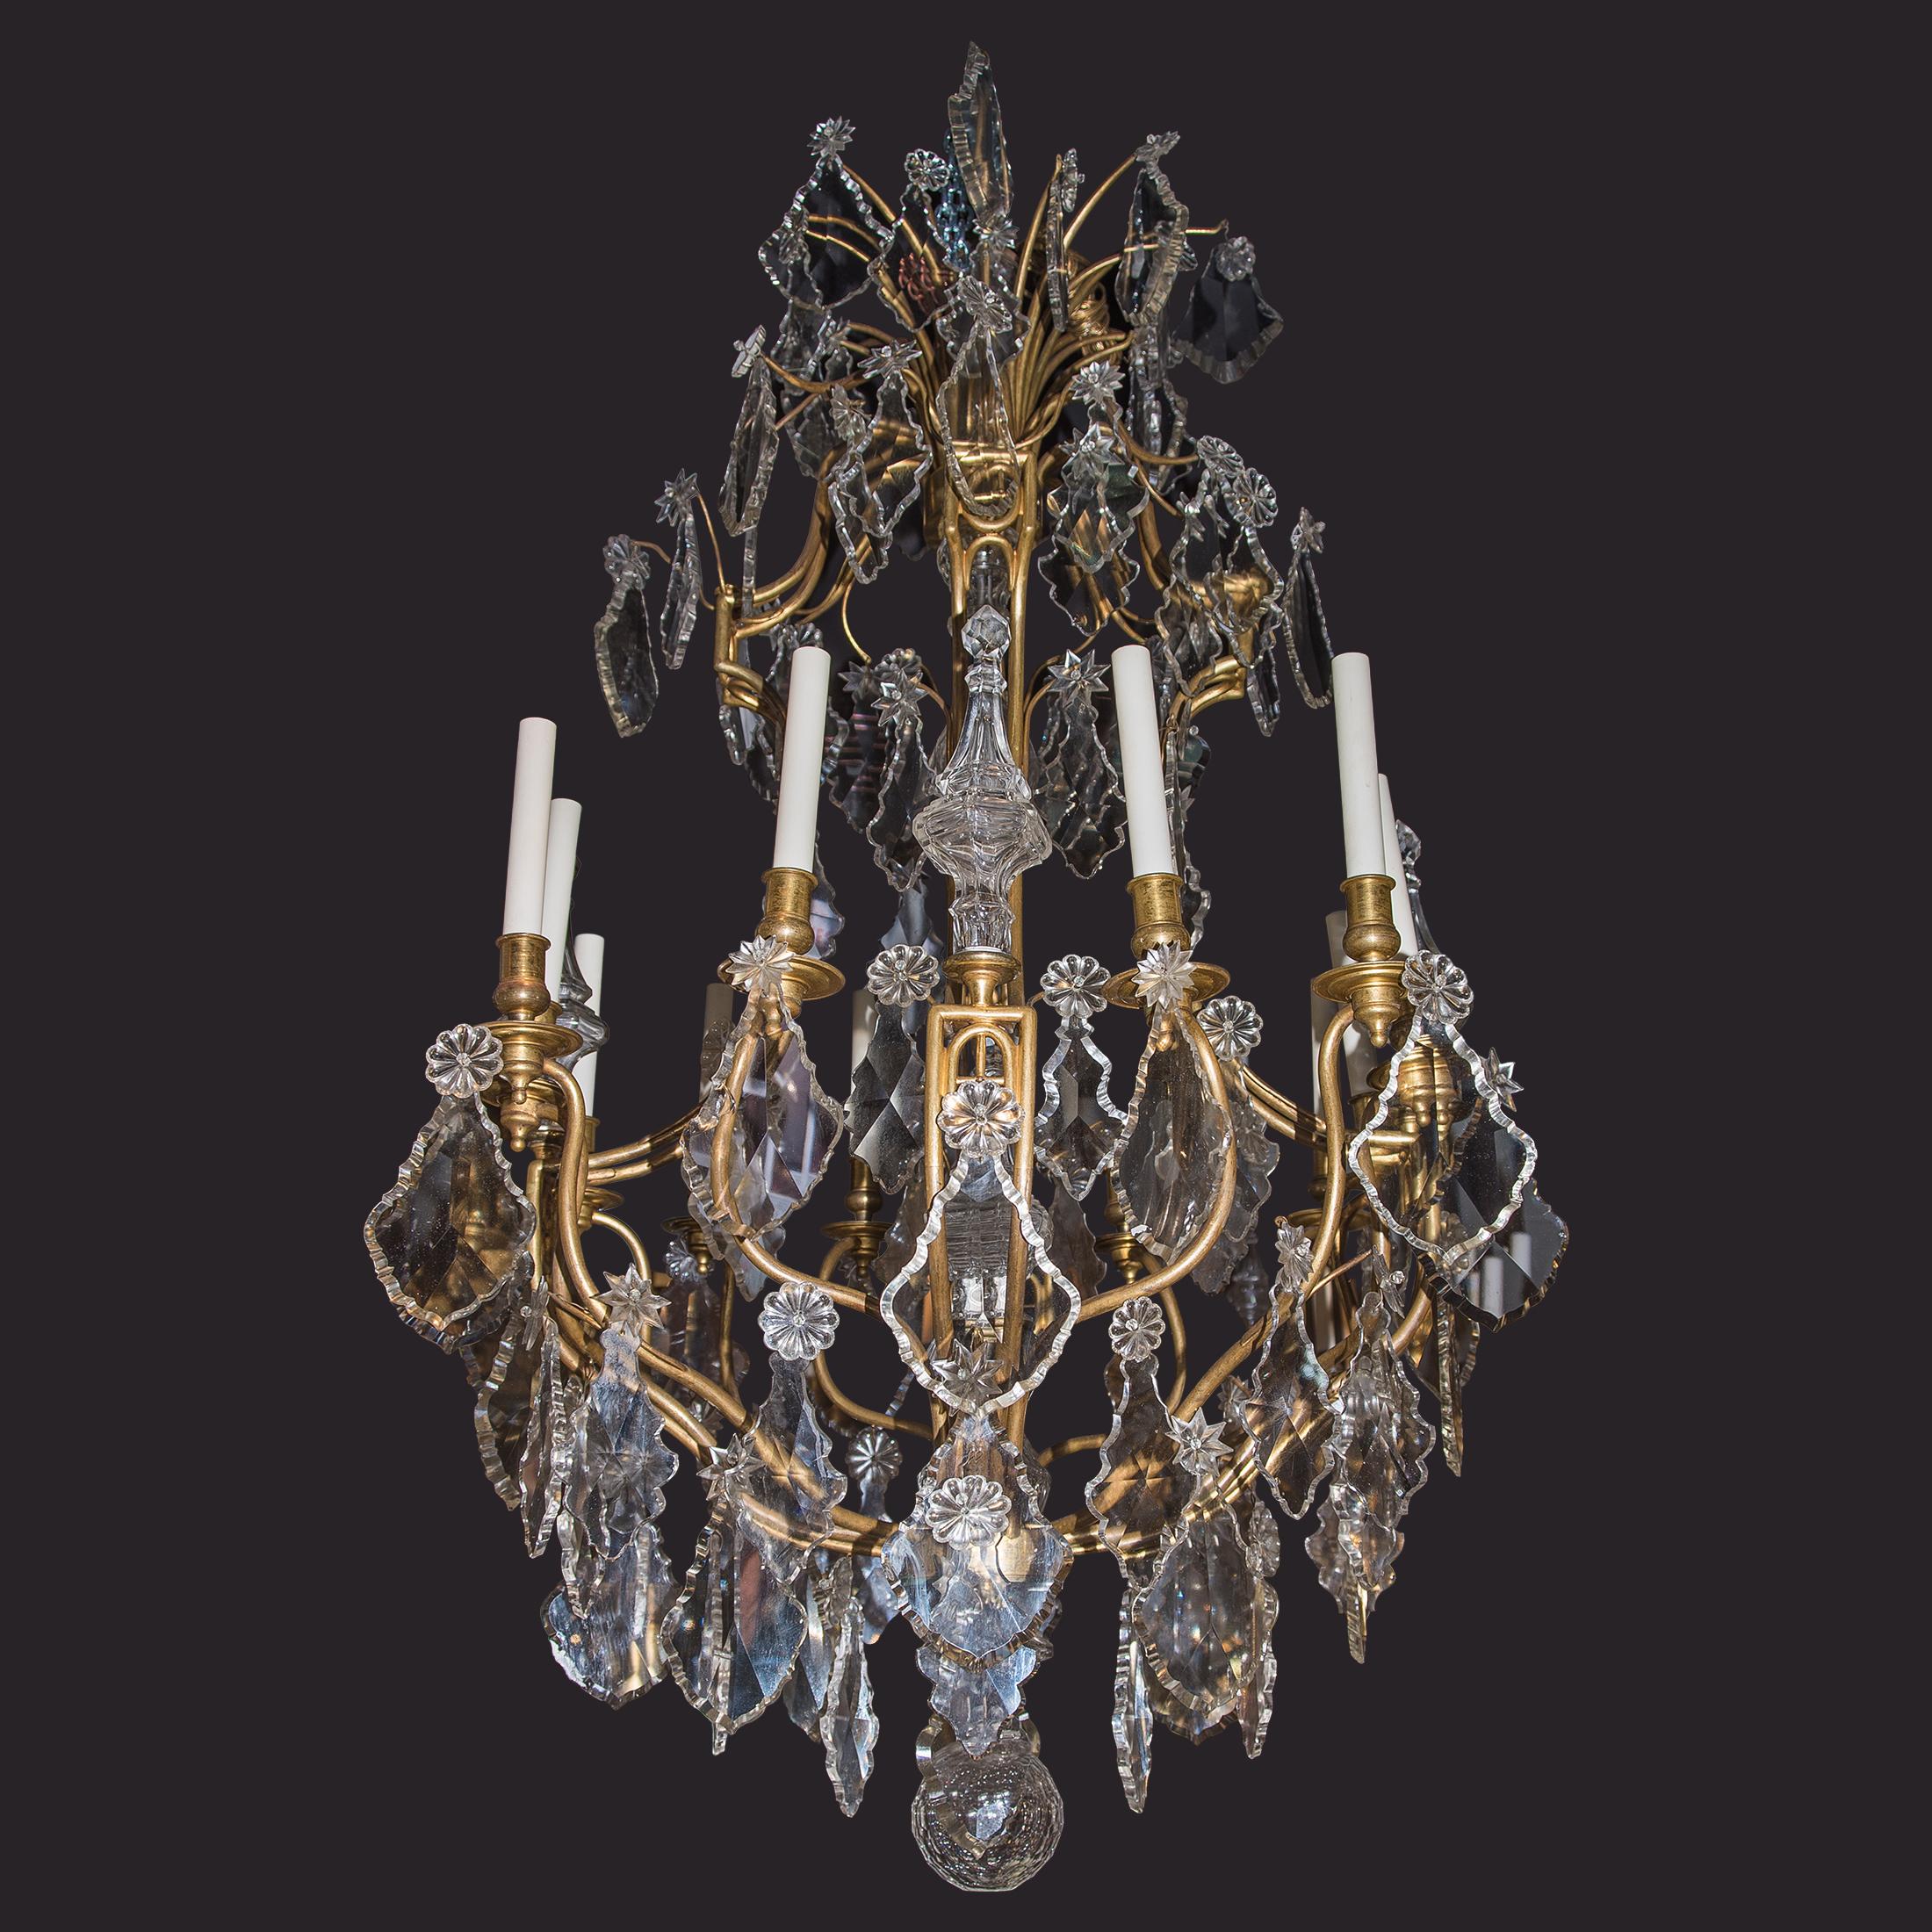 About

A fine quality gilt bronze and alabaster eight-light chandelier hung from four double chains terminating in entwined cornucopias, the alabaster dome carved in the round with bacchanalian scenes, the chains joined by entwined fruit filled